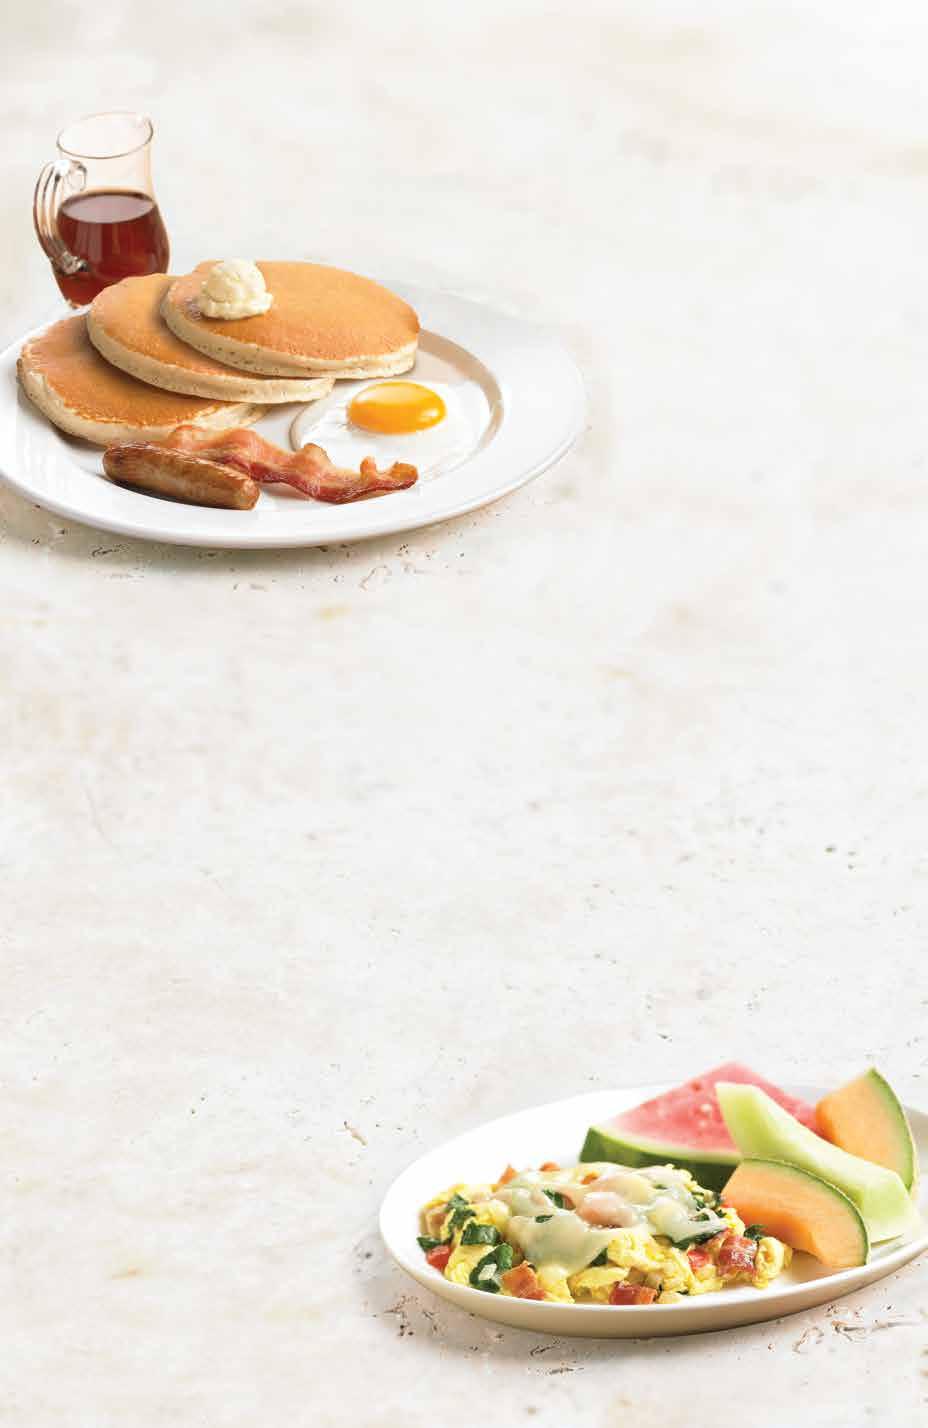 CLUB 55 BREAKFAST Affordable, High Quality Breakfast & Healthier Options for our Guests 55 and Above.* * Please no coupons with Club 55.